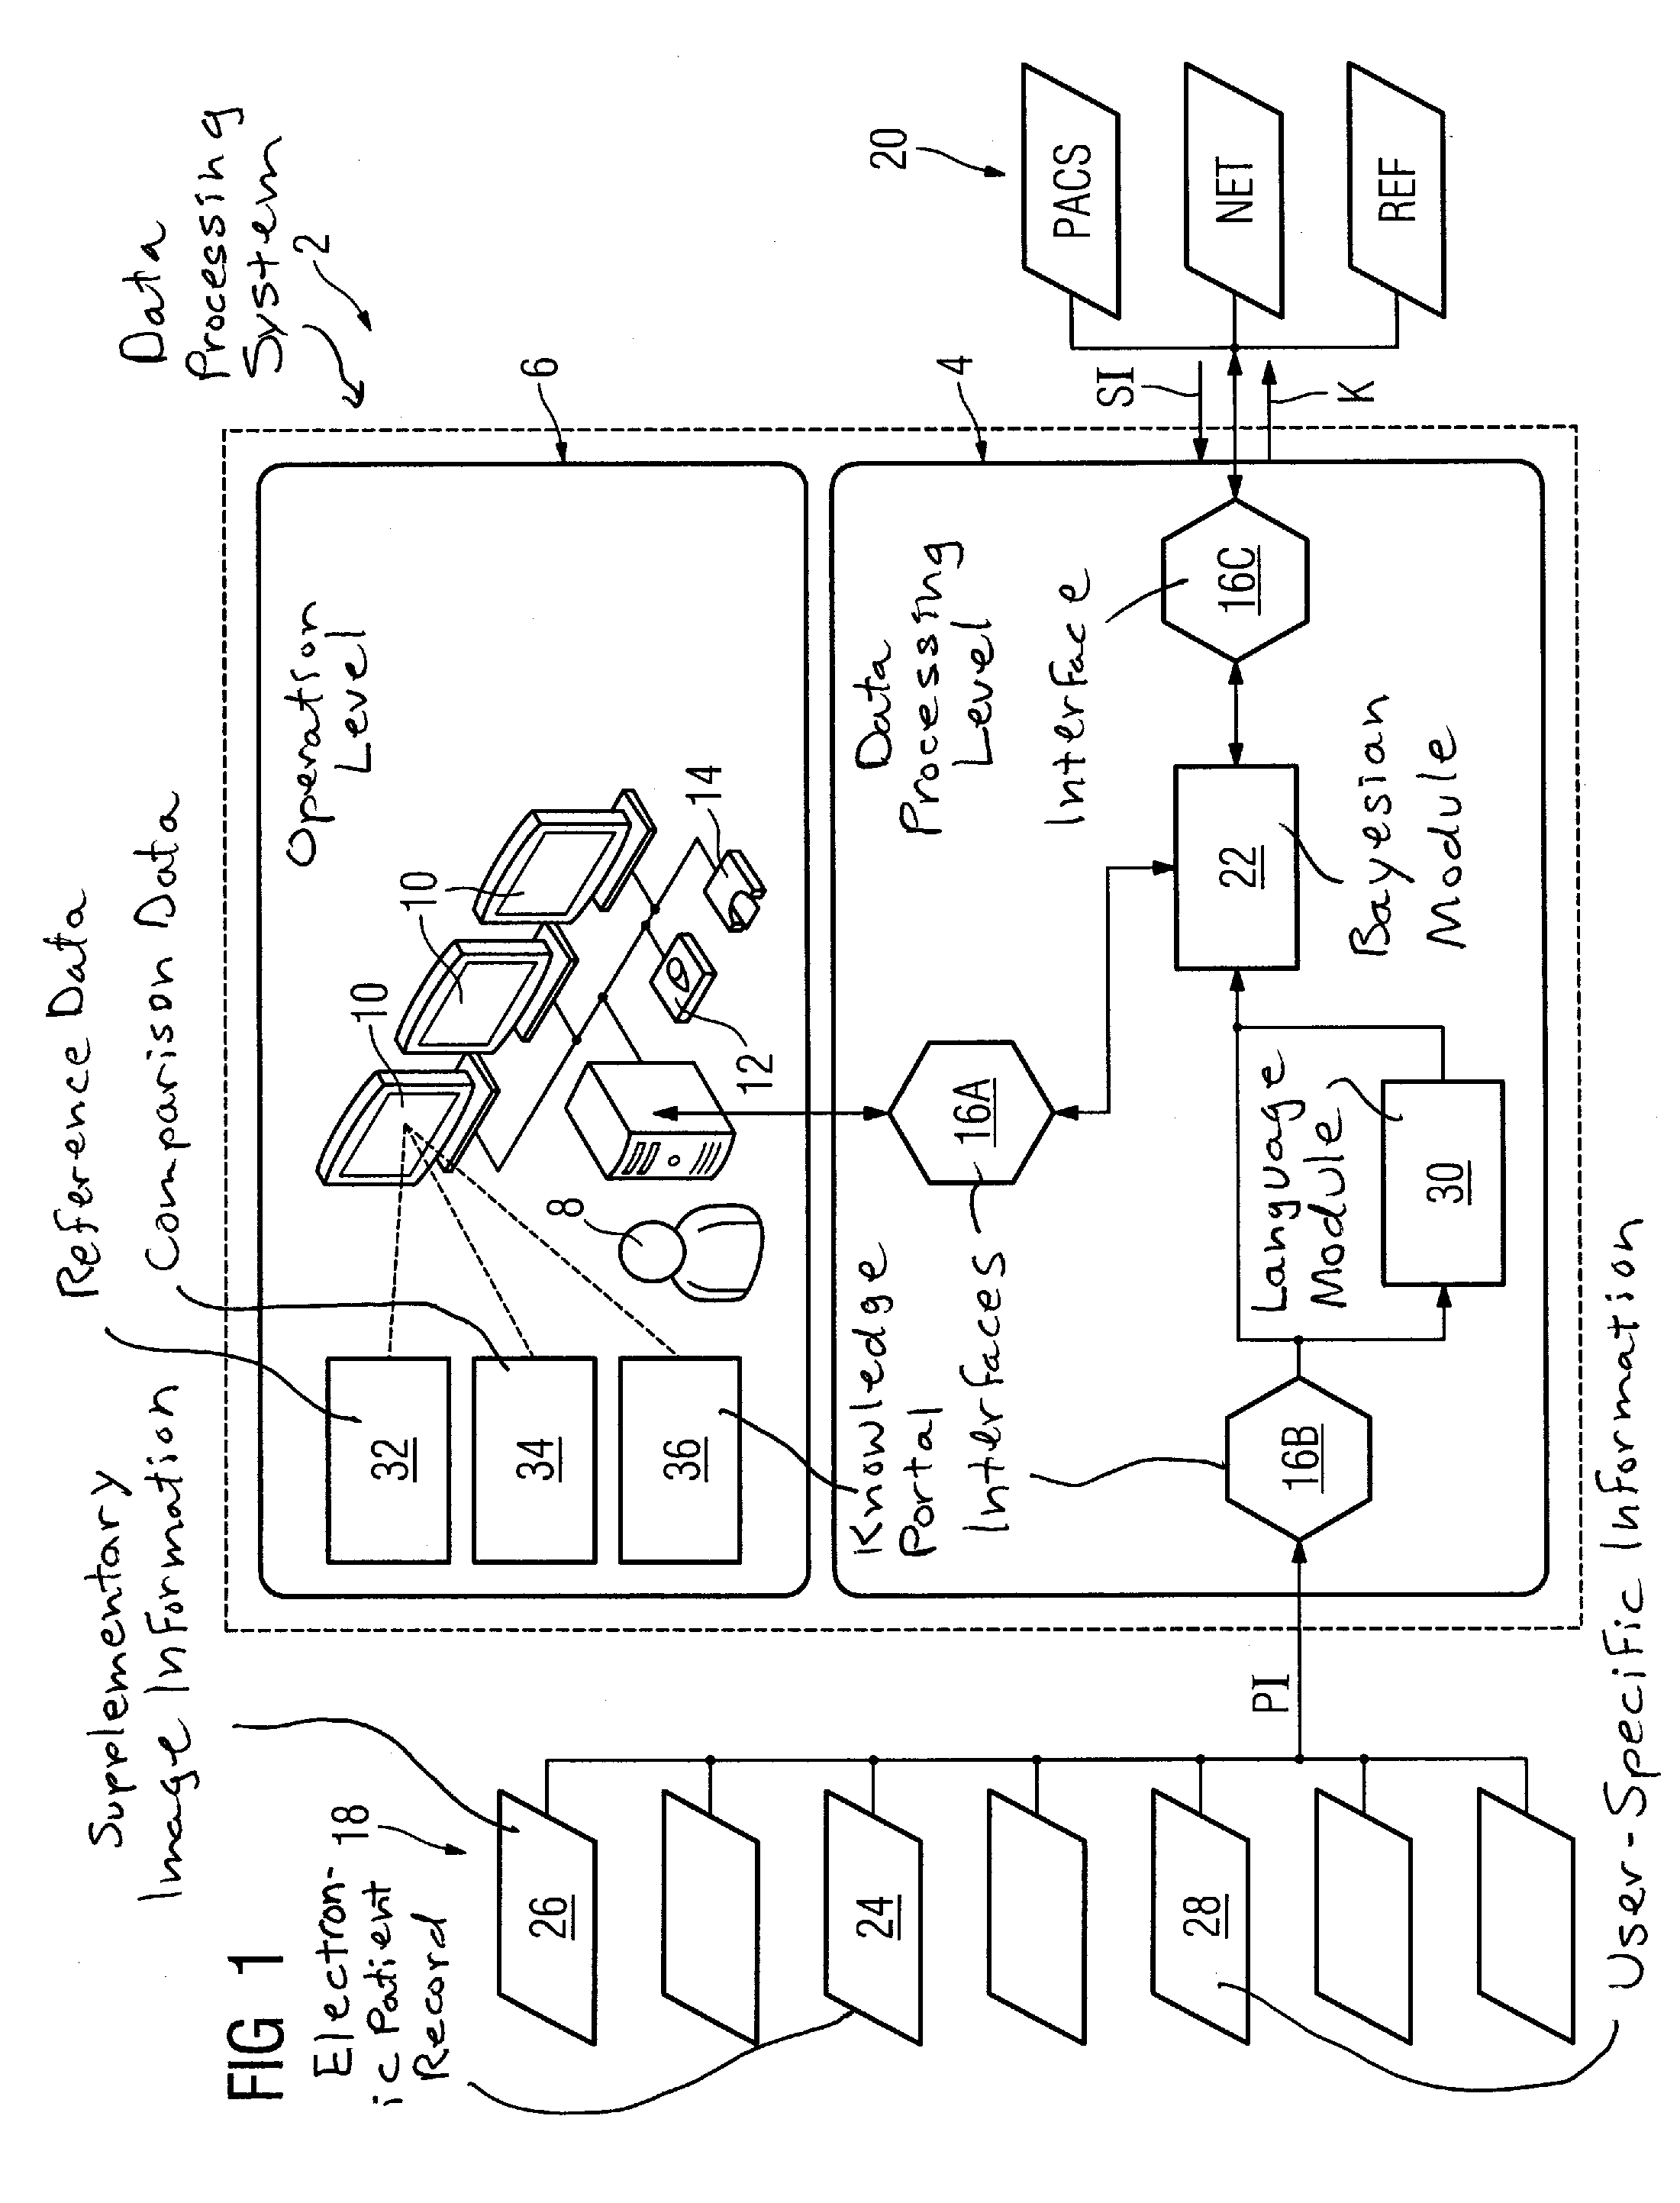 Method and data processing system to assist a medical diagnosis